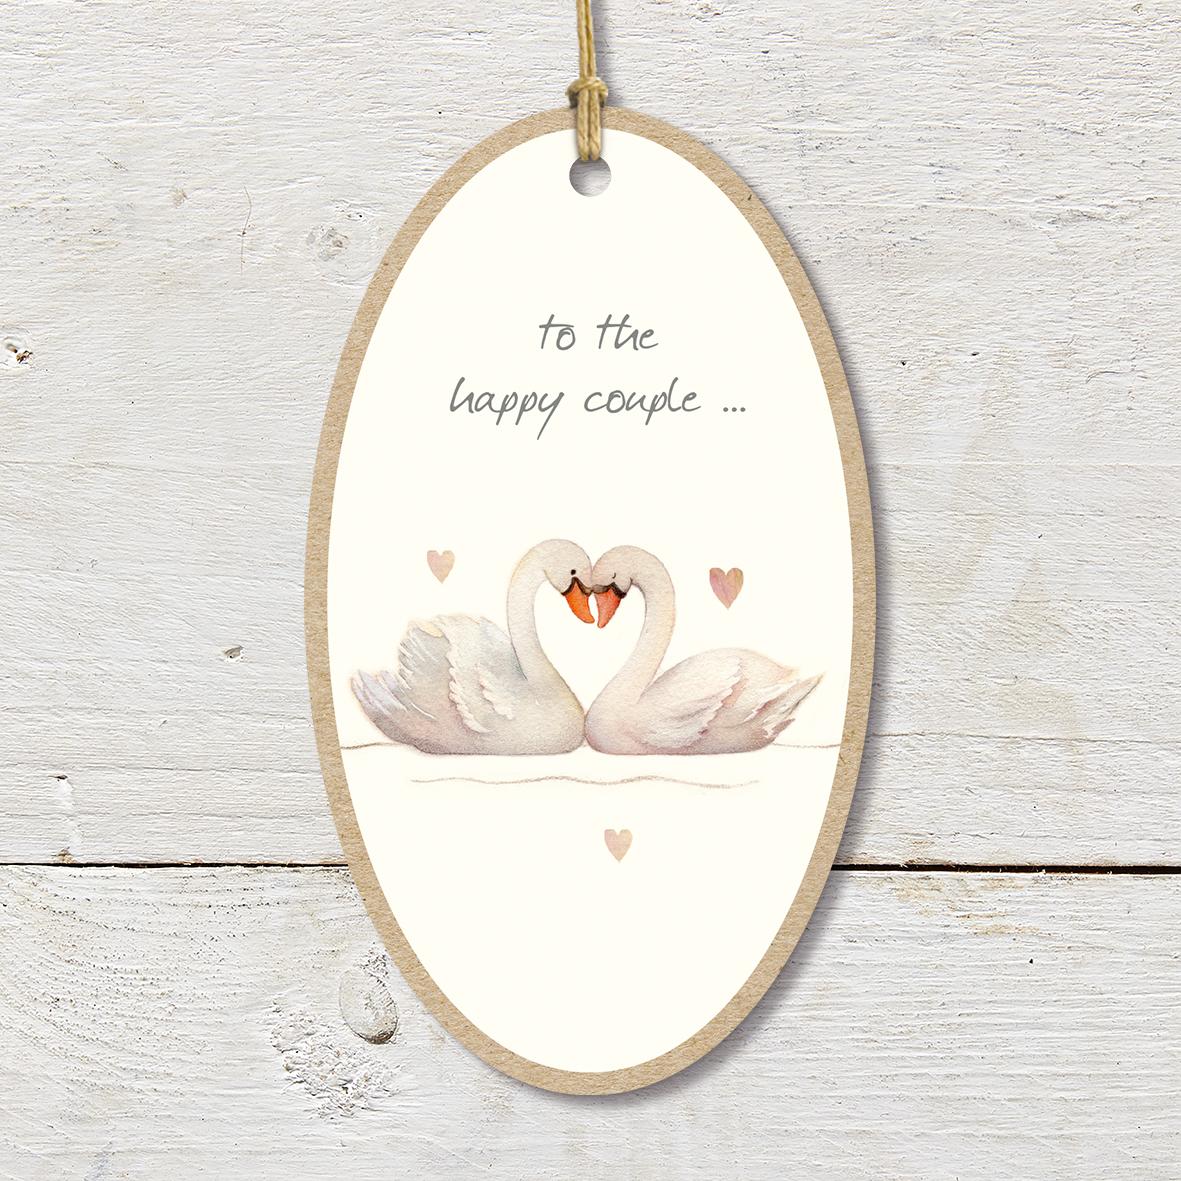 Large Wooden Plaque featuring a cute swan couple and hearts with a ’To the happy couple’ caption.